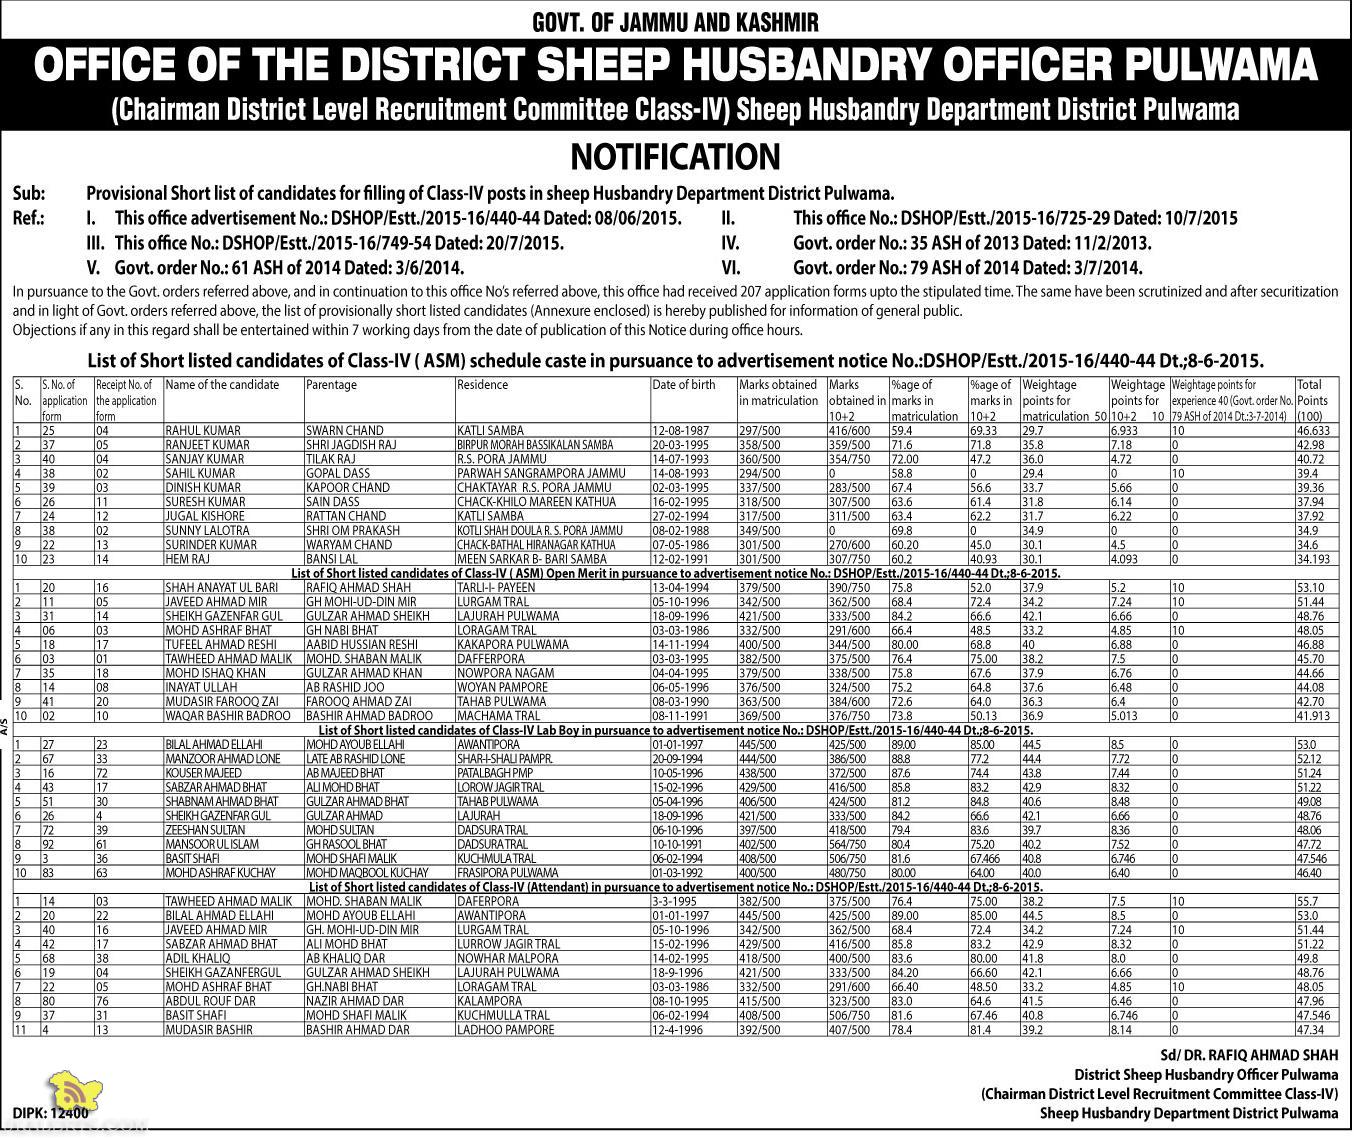 JKPSC Provisional Short list of candidates for filling of Class-IV posts in sheep Husbandary